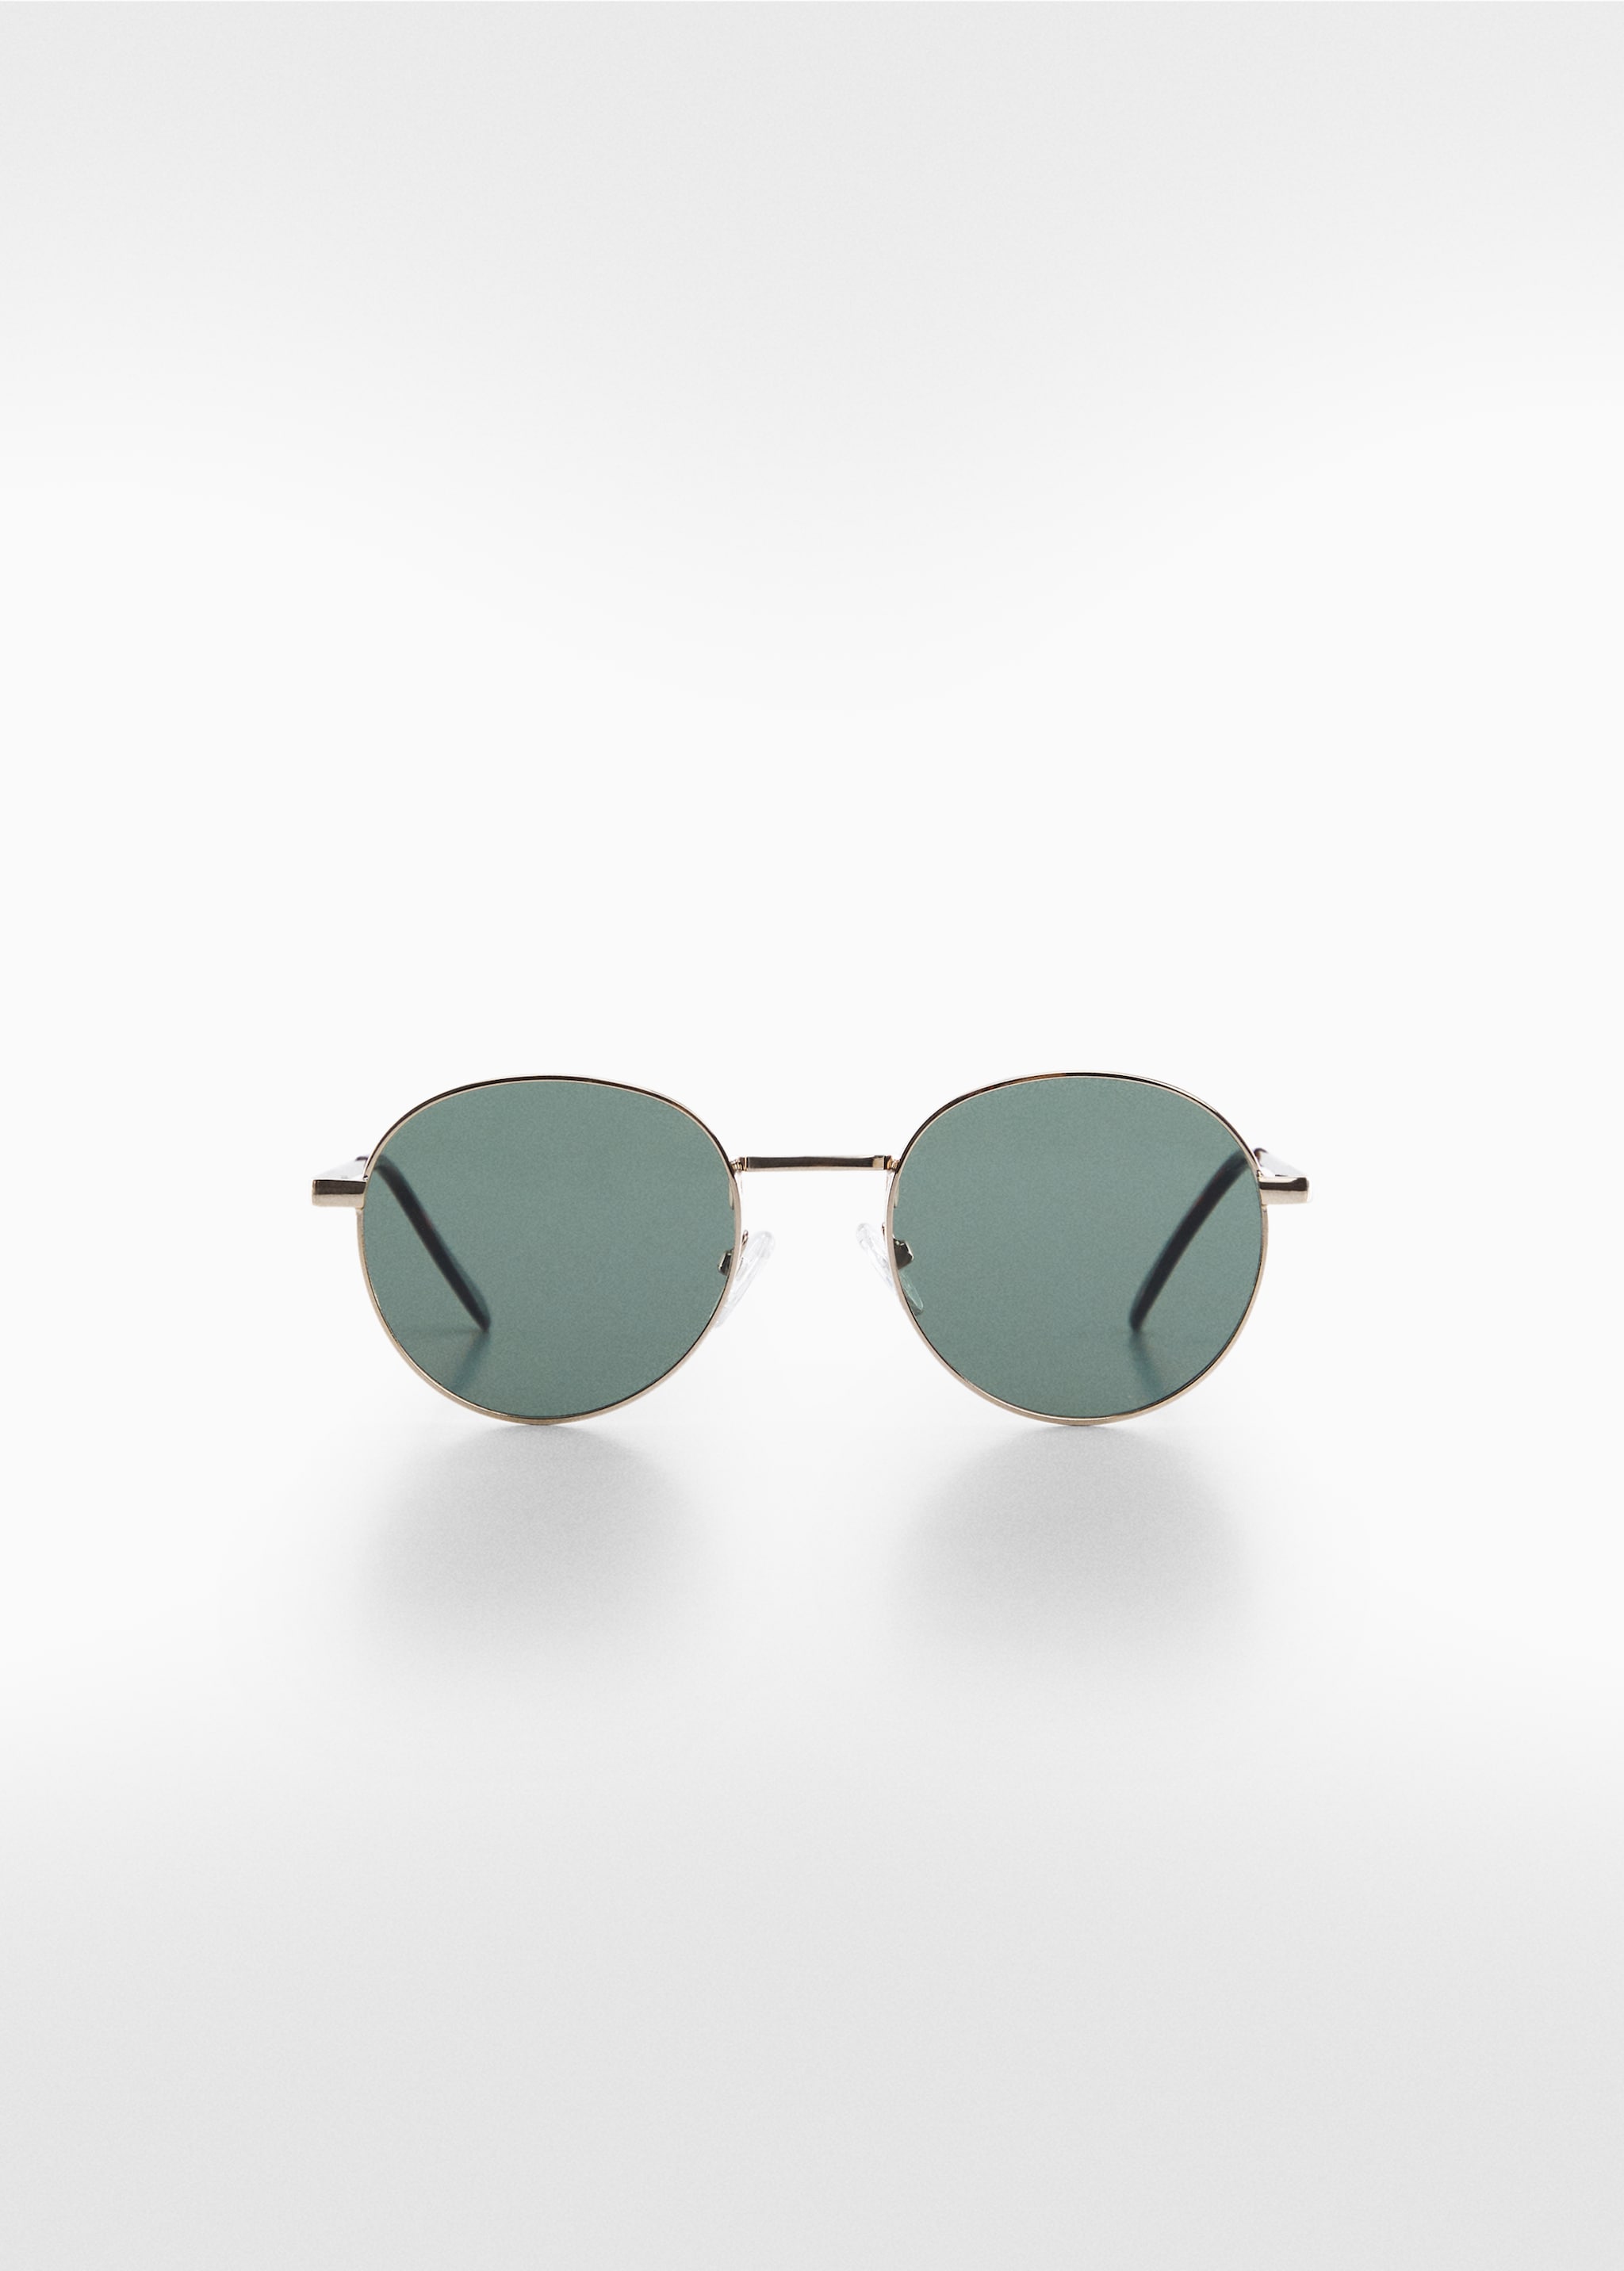 Round metal-rimmed sunglasses - Article without model